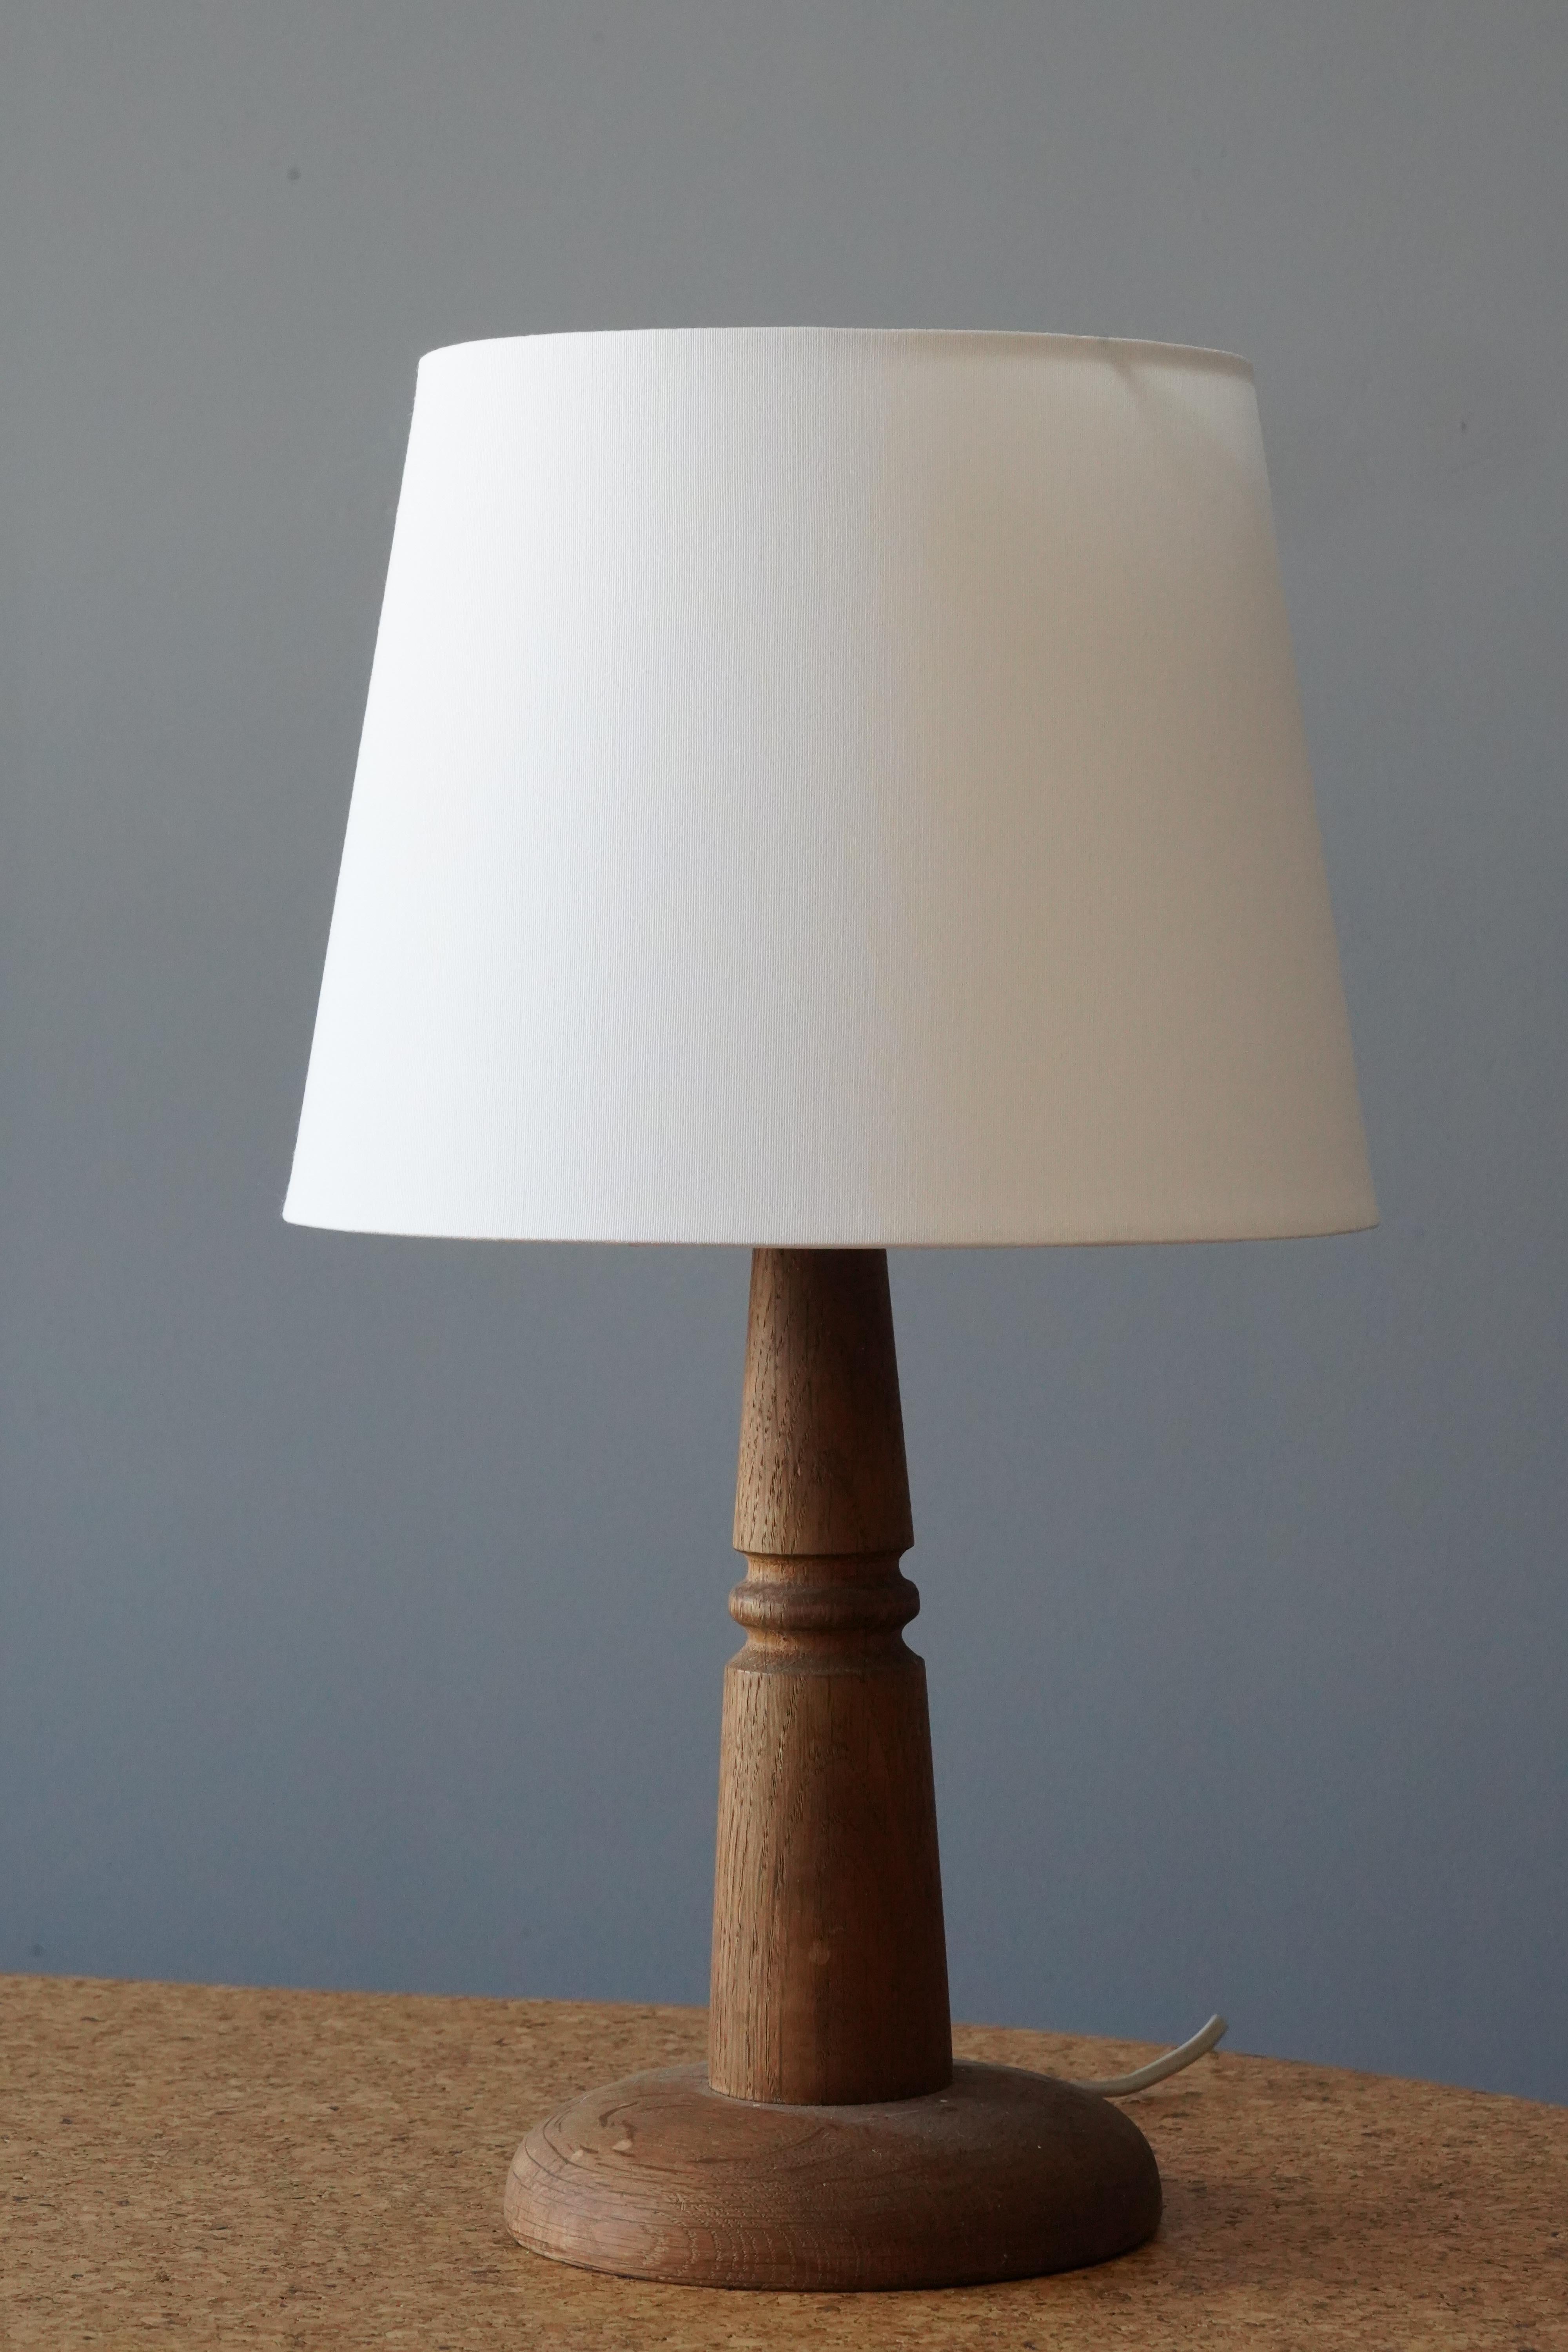 A table lamp designed and produced in Sweden in, c. 1960s.

Stated dimensions exclude lampshade, height includes the socket.